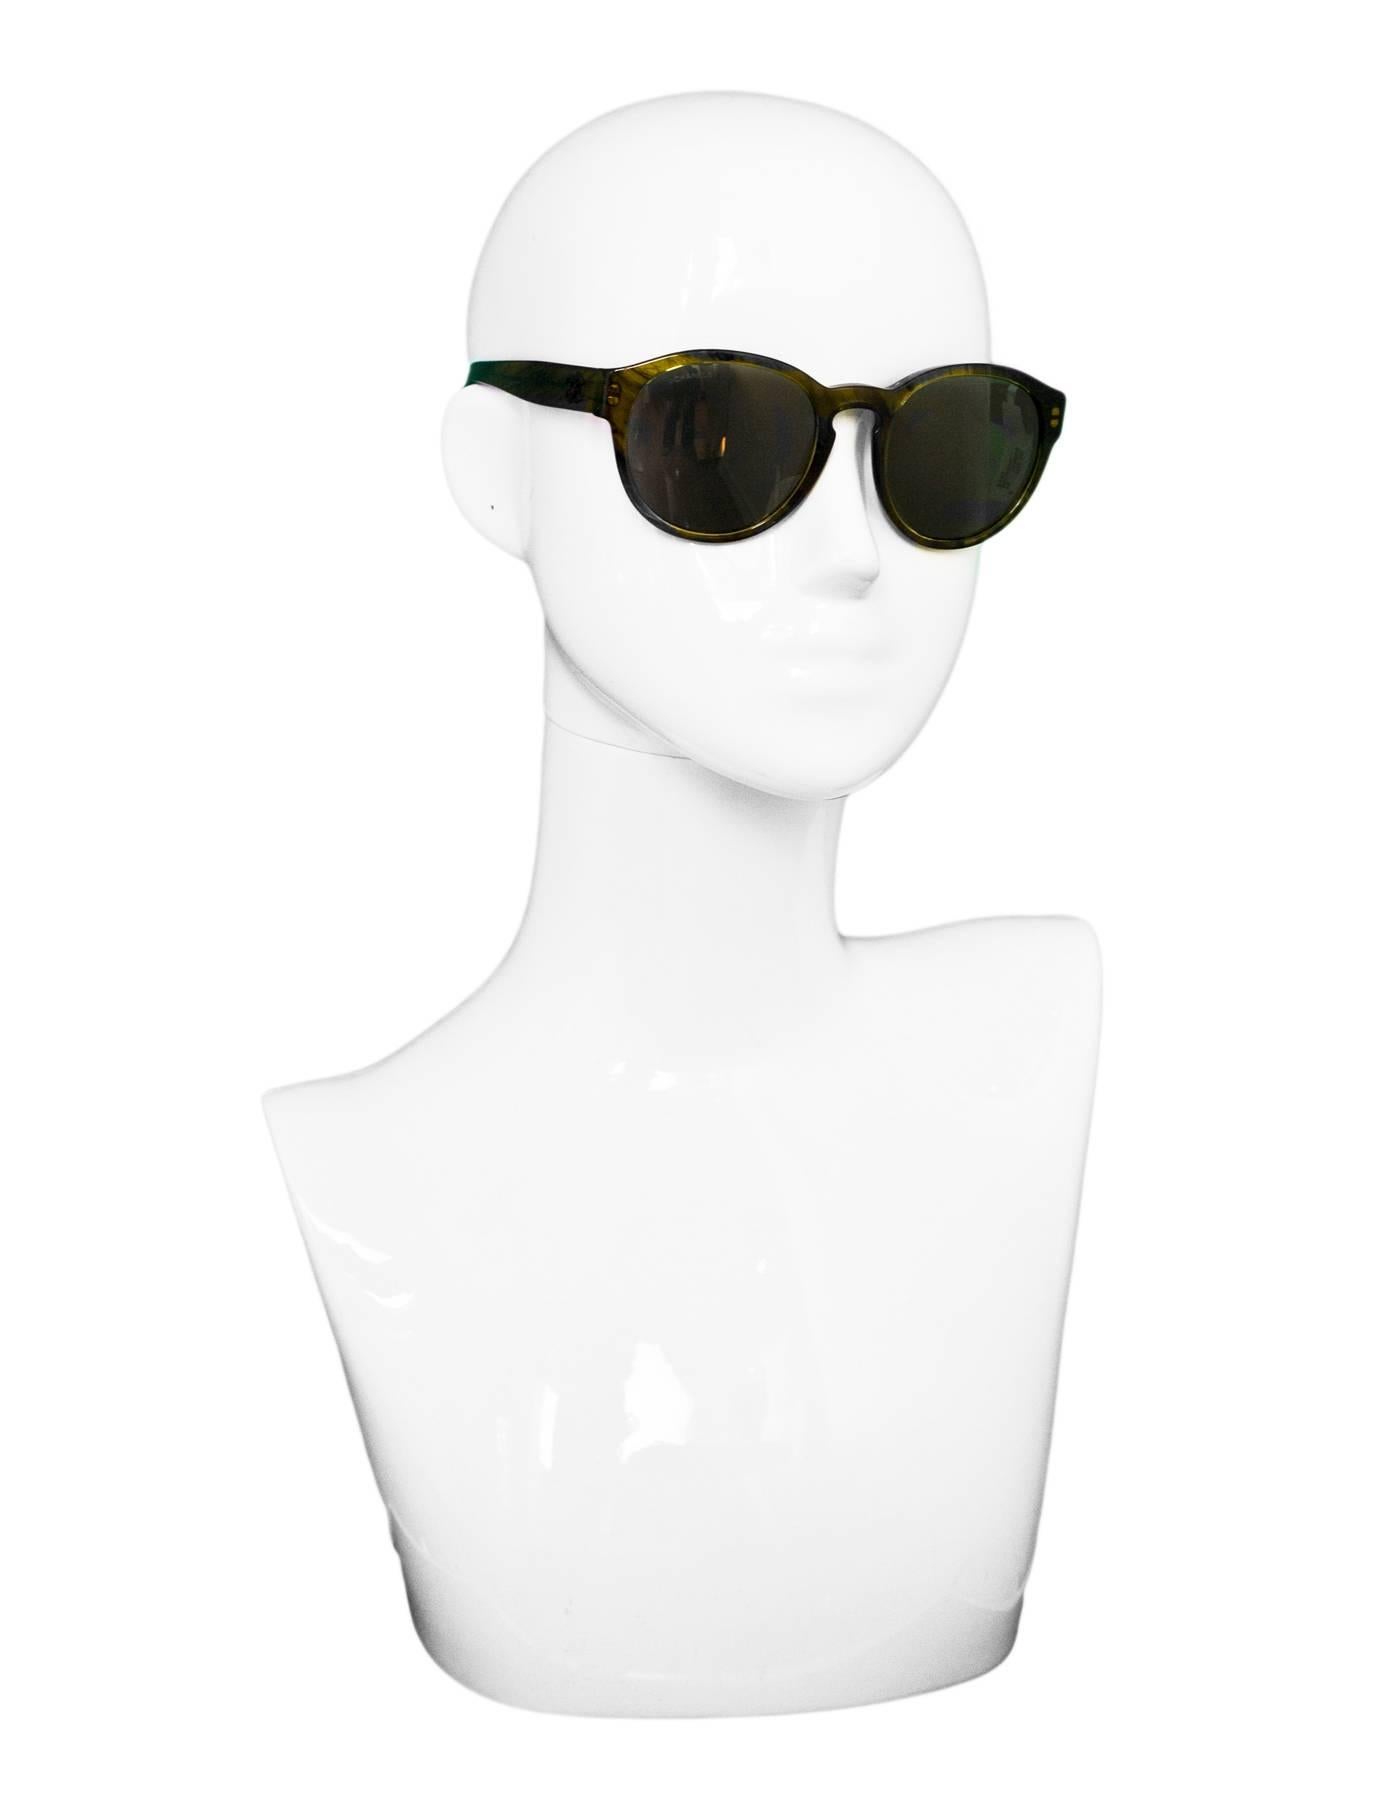 Chanel Green 5359 Pantos Fall Round Frame Sunglasses

Made In: Italy
Color: Green
Materials: Resin
Retail Price: $405 + tax
Overall Condition: Excellent pre-owned condition
Included: Chanel box, case, dust bag, sales tag

Measurements: 
Across: